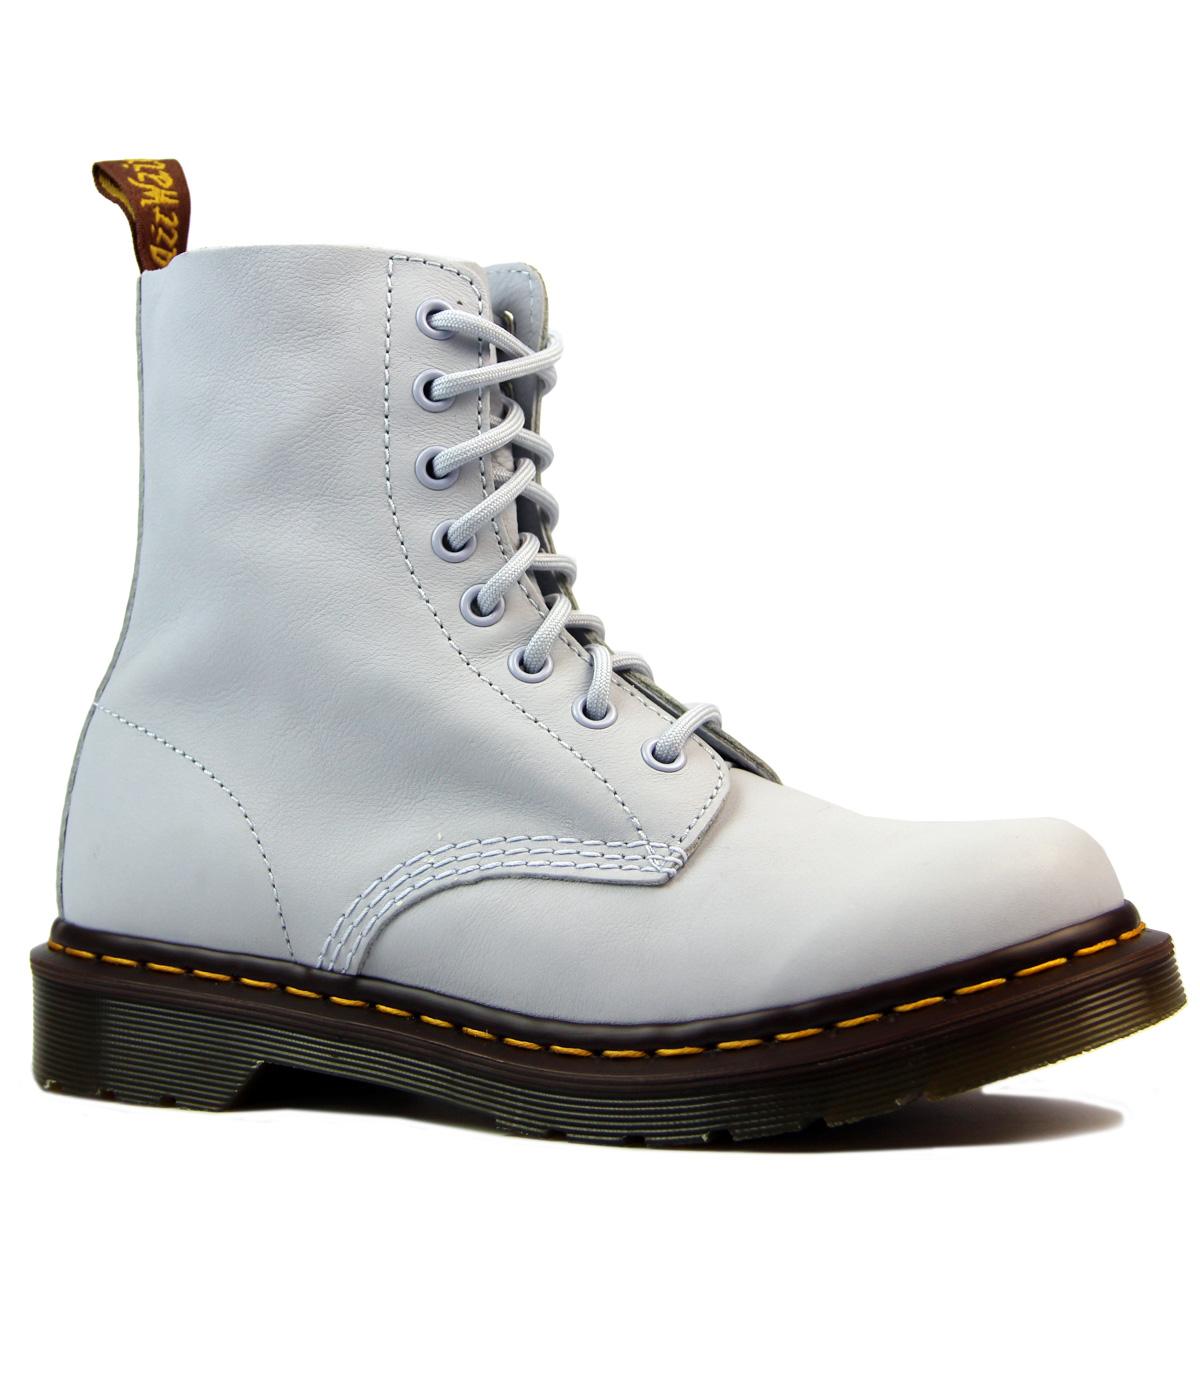 Pascal DR MARTENS Mod Virginia Leather Boots 